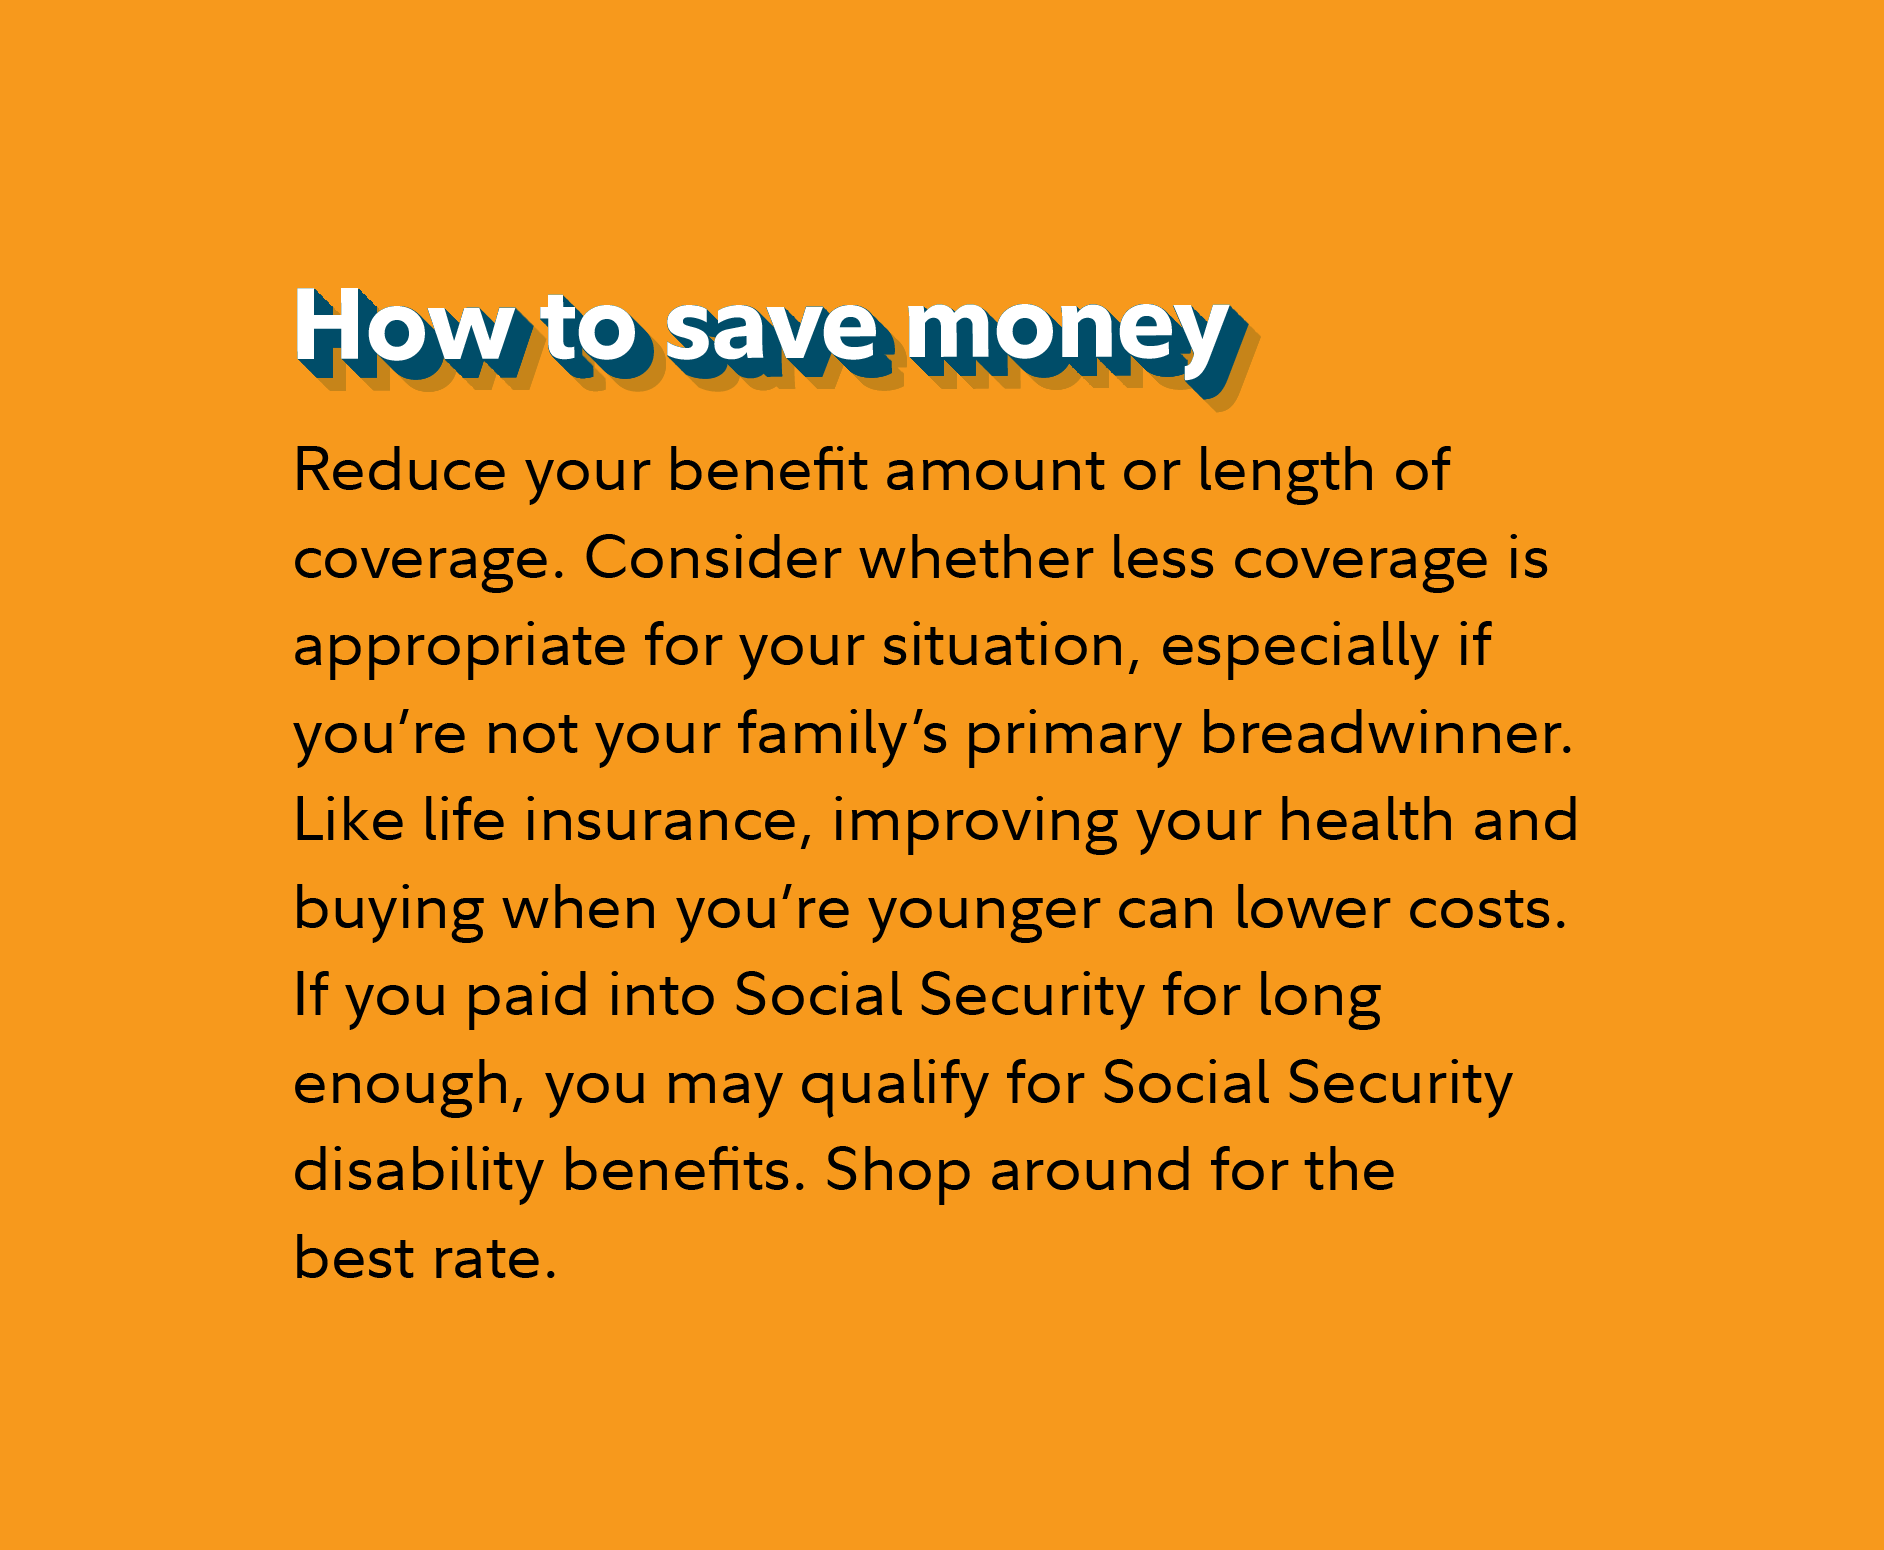 How to save money Reduce your benefit amount or length of coverage. Consider whether less coverage is appropriate for your situation, especially if you’re not your family’s primary breadwinner. Like life insurance, improving your health and buying when you’re younger can lower costs. If you paid into Social Security for long enough, you may qualify for Social Security disability benefits. Shop around for the best rate.